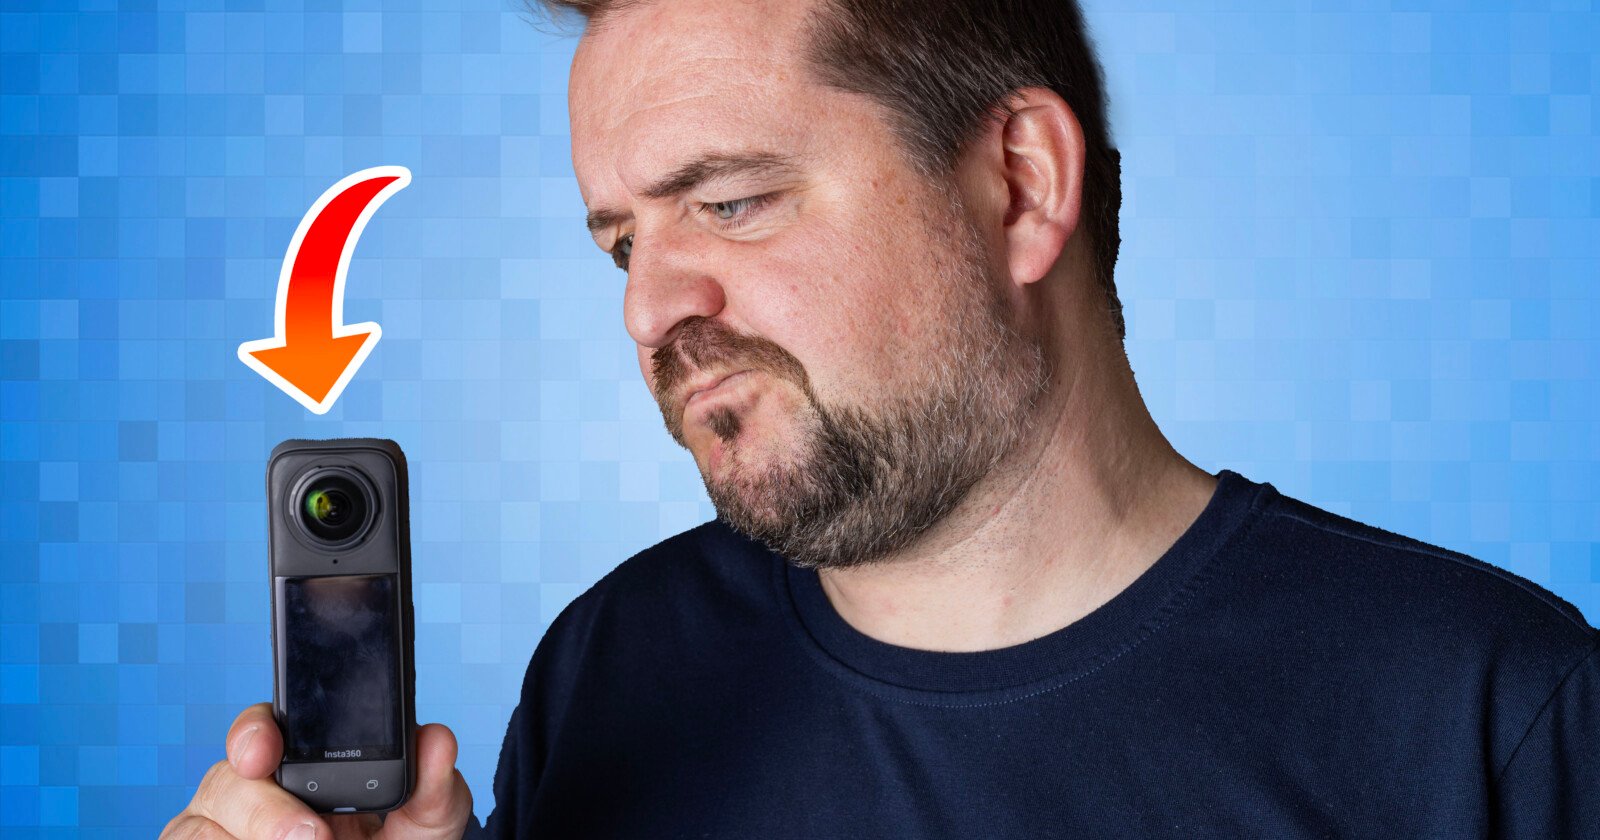 A man with a beard appears skeptical while looking at a small handheld camera he is holding in one hand, with an arrow pointing to the camera against a blue background.